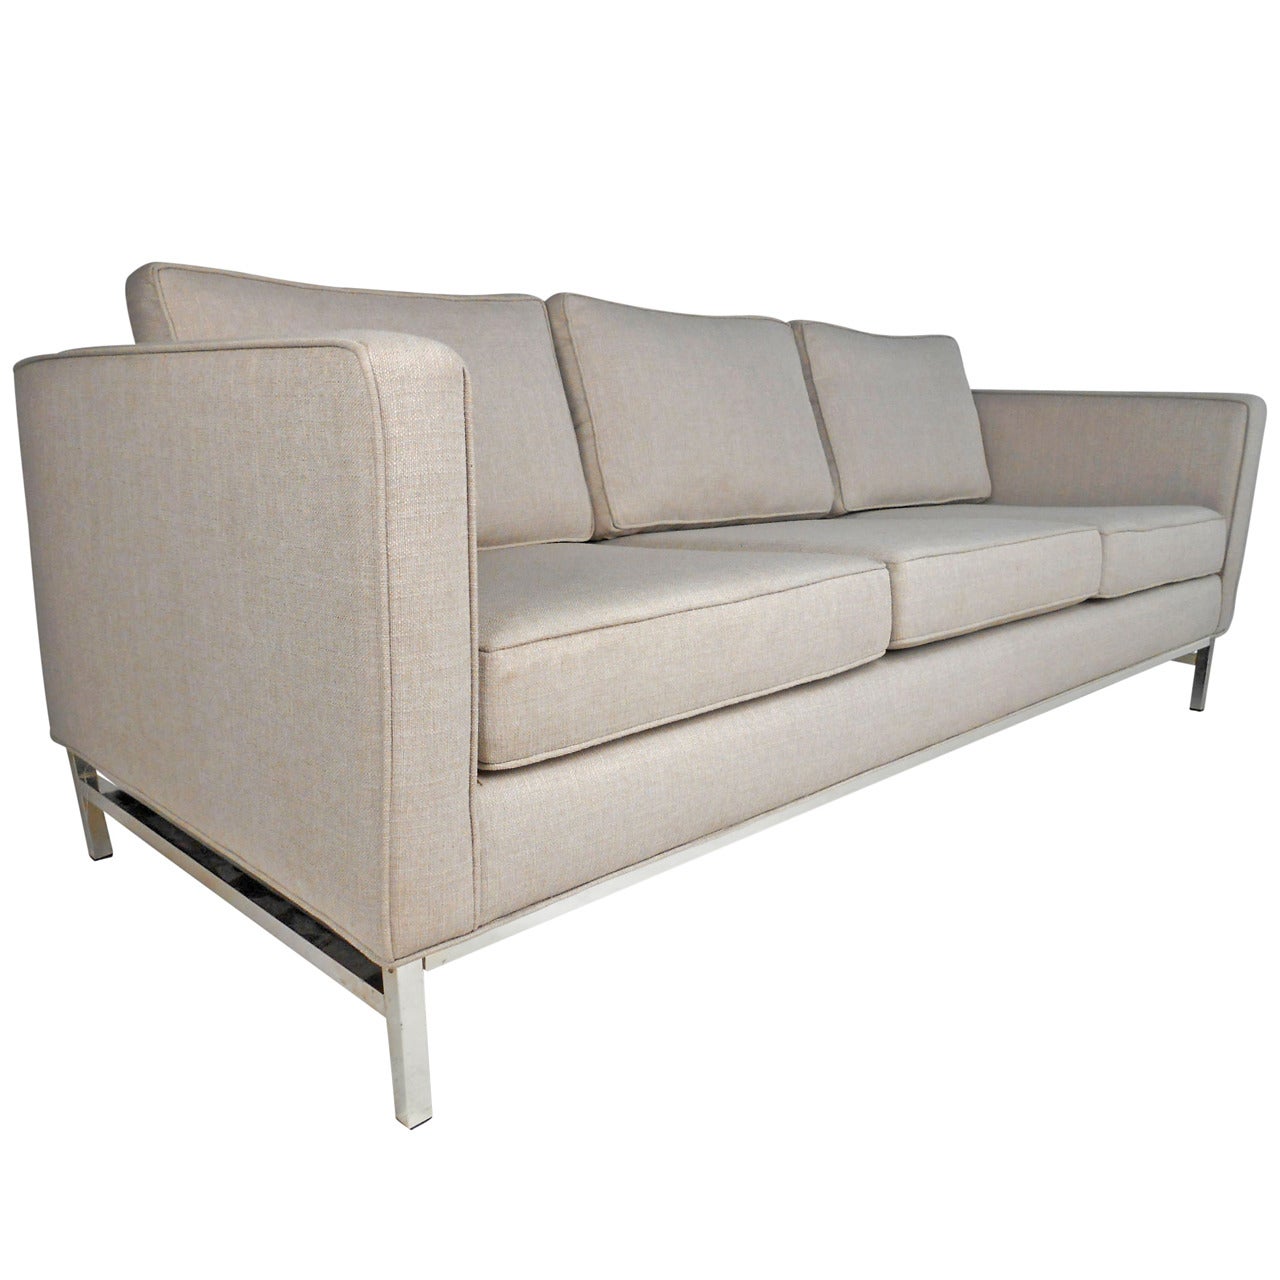 Mid-Century Modern Sofa after Florence Knoll